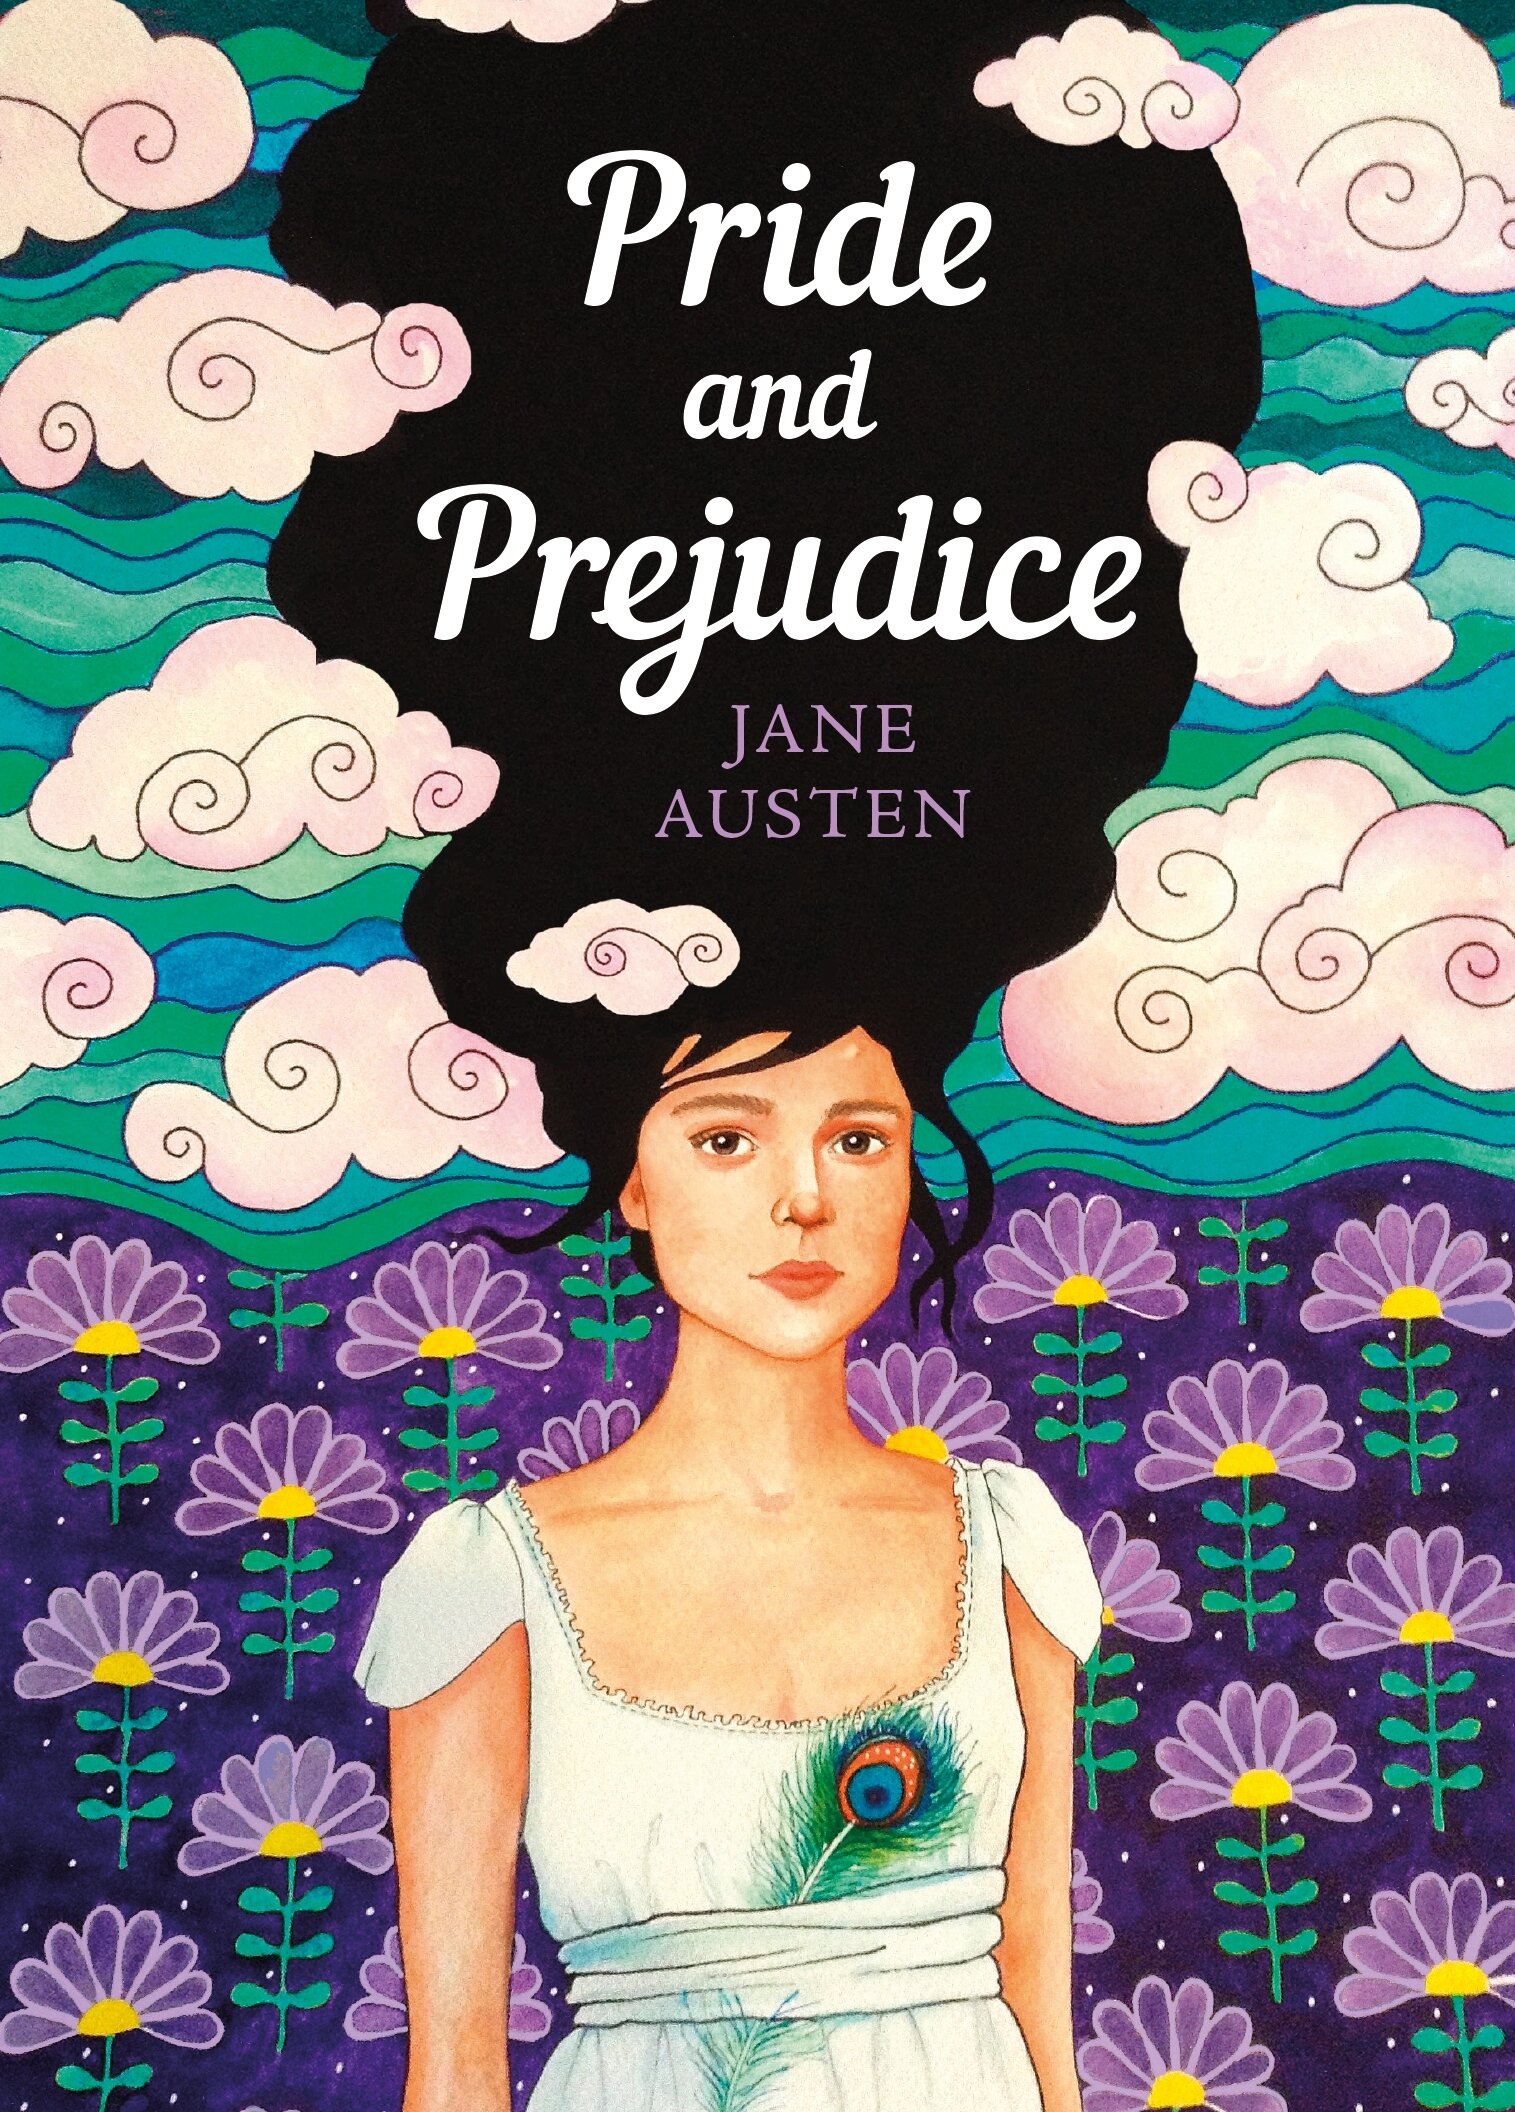 book review of pride and prejudice in 100 words